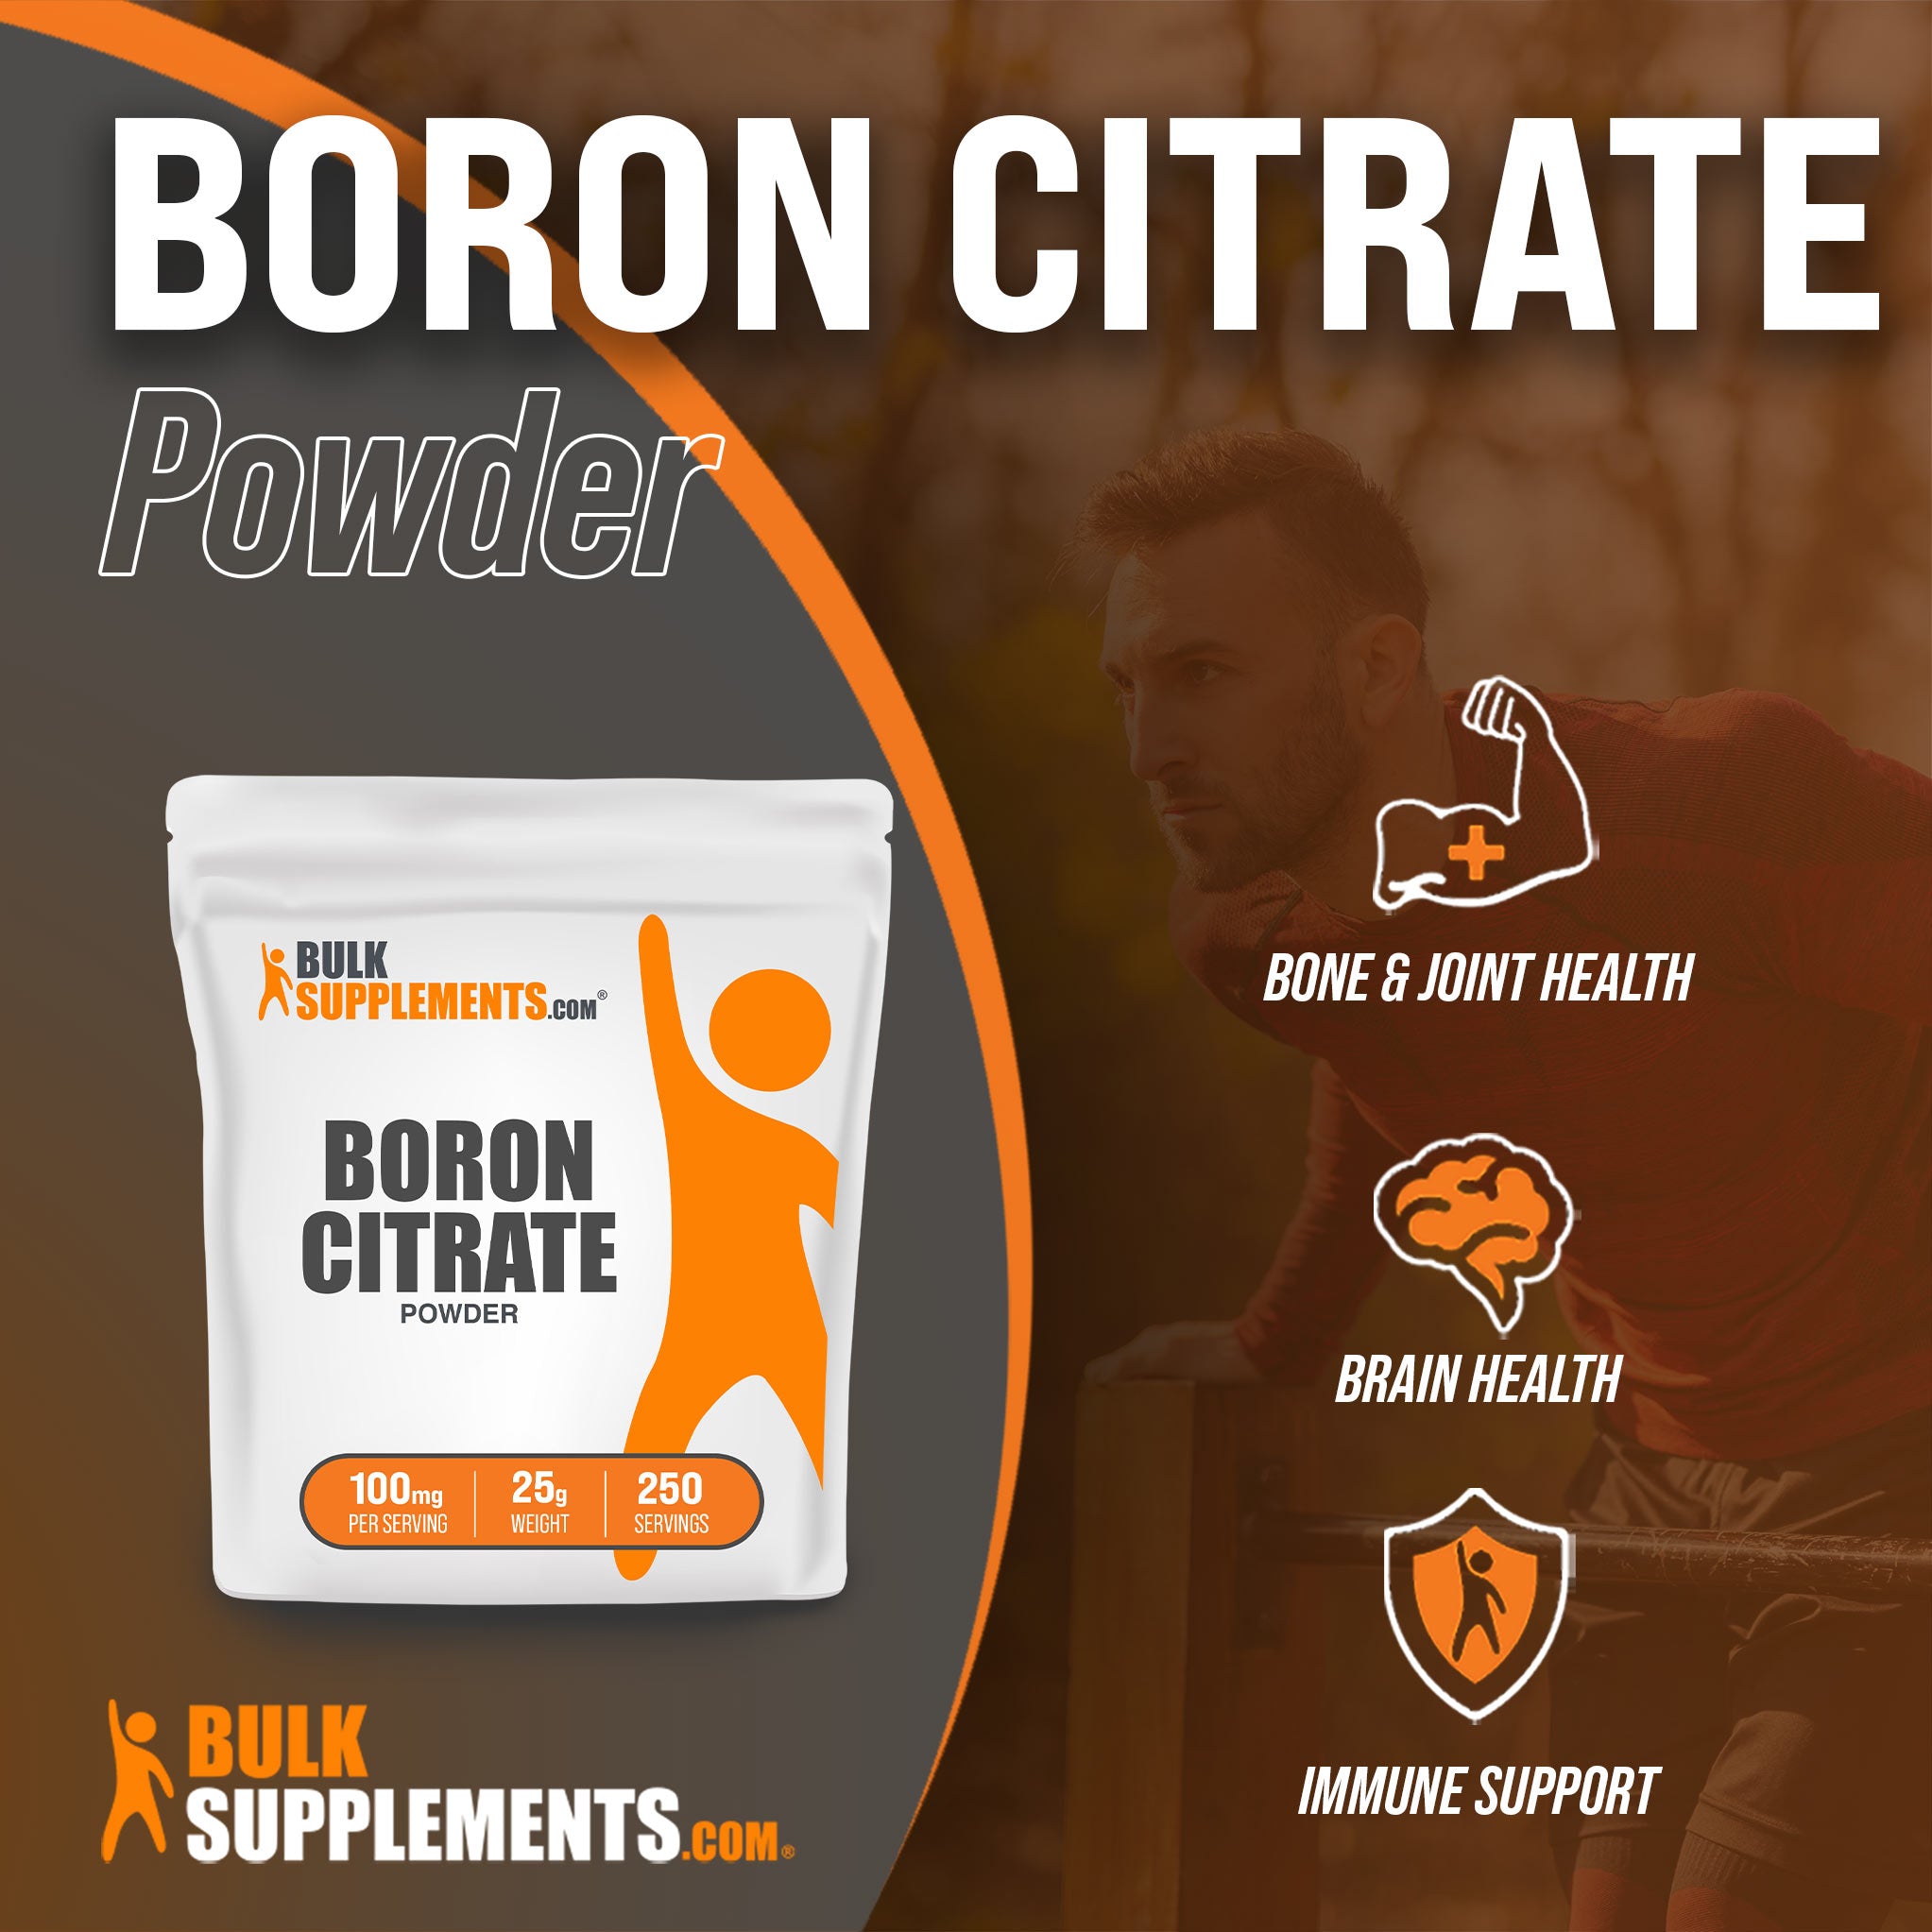 25g of Boron Citrate: 100mg Servings